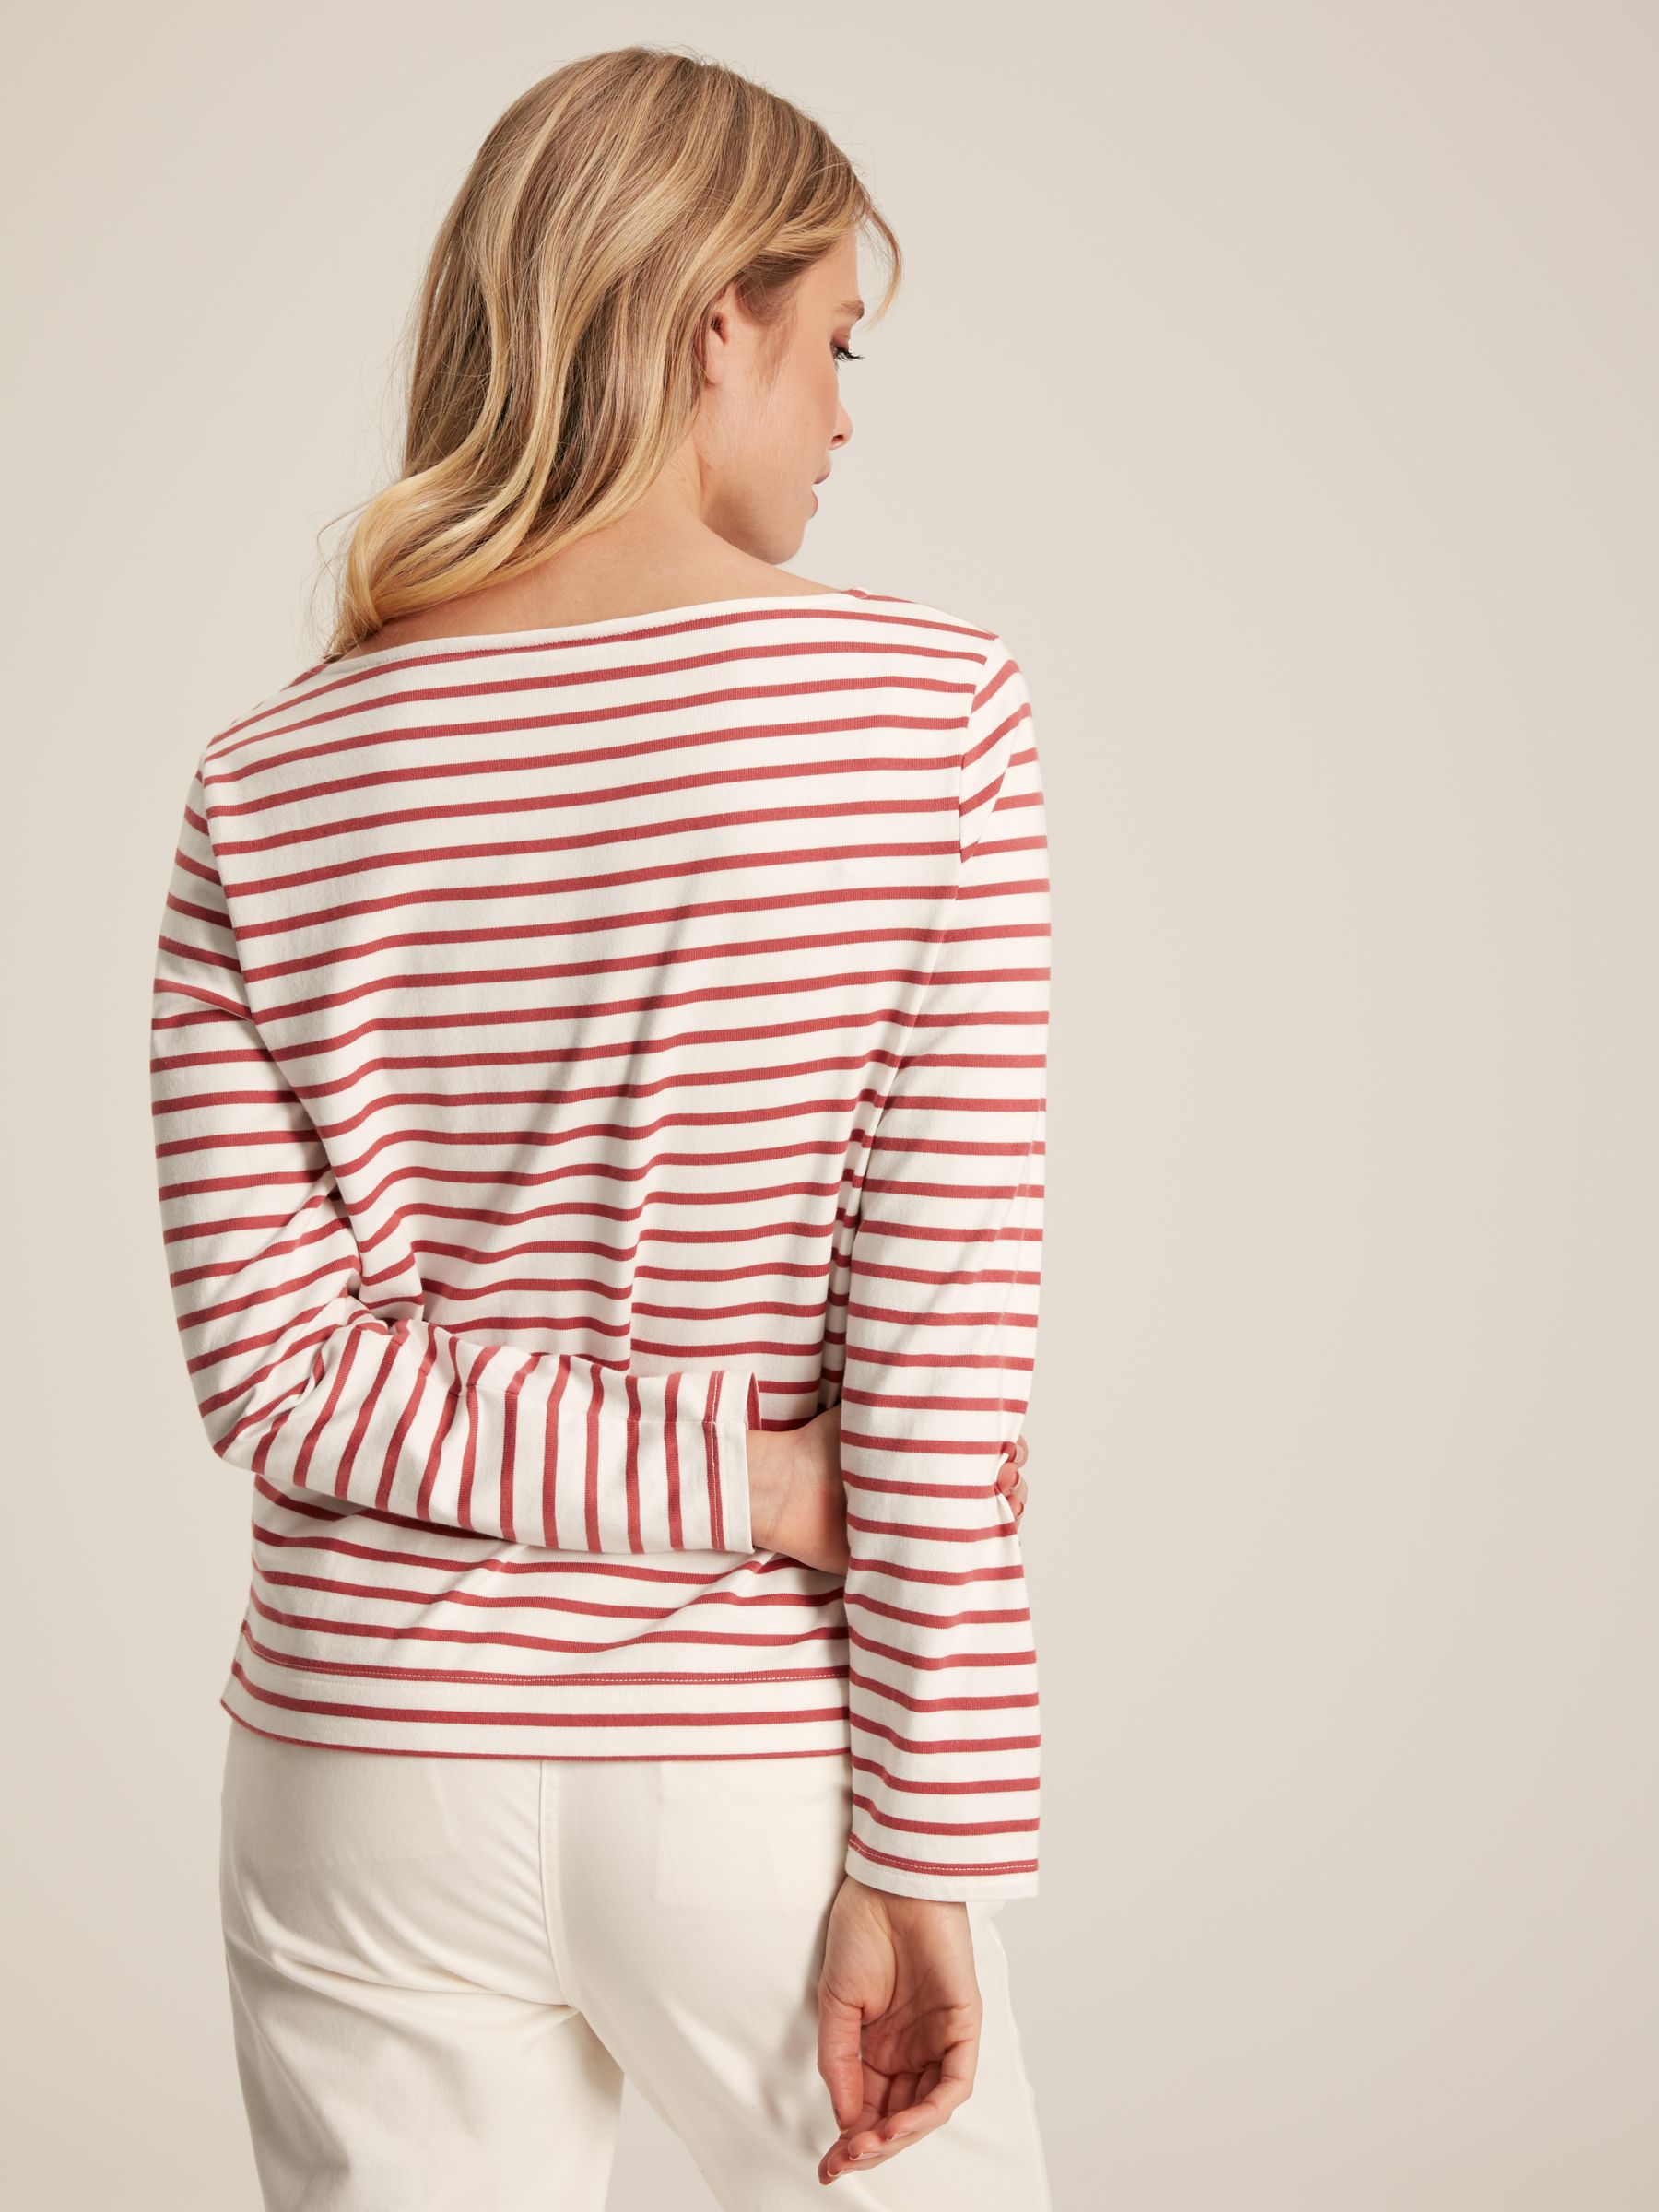 Buy Harbour Pink Striped Long Sleeve Breton Top from the Joules online shop